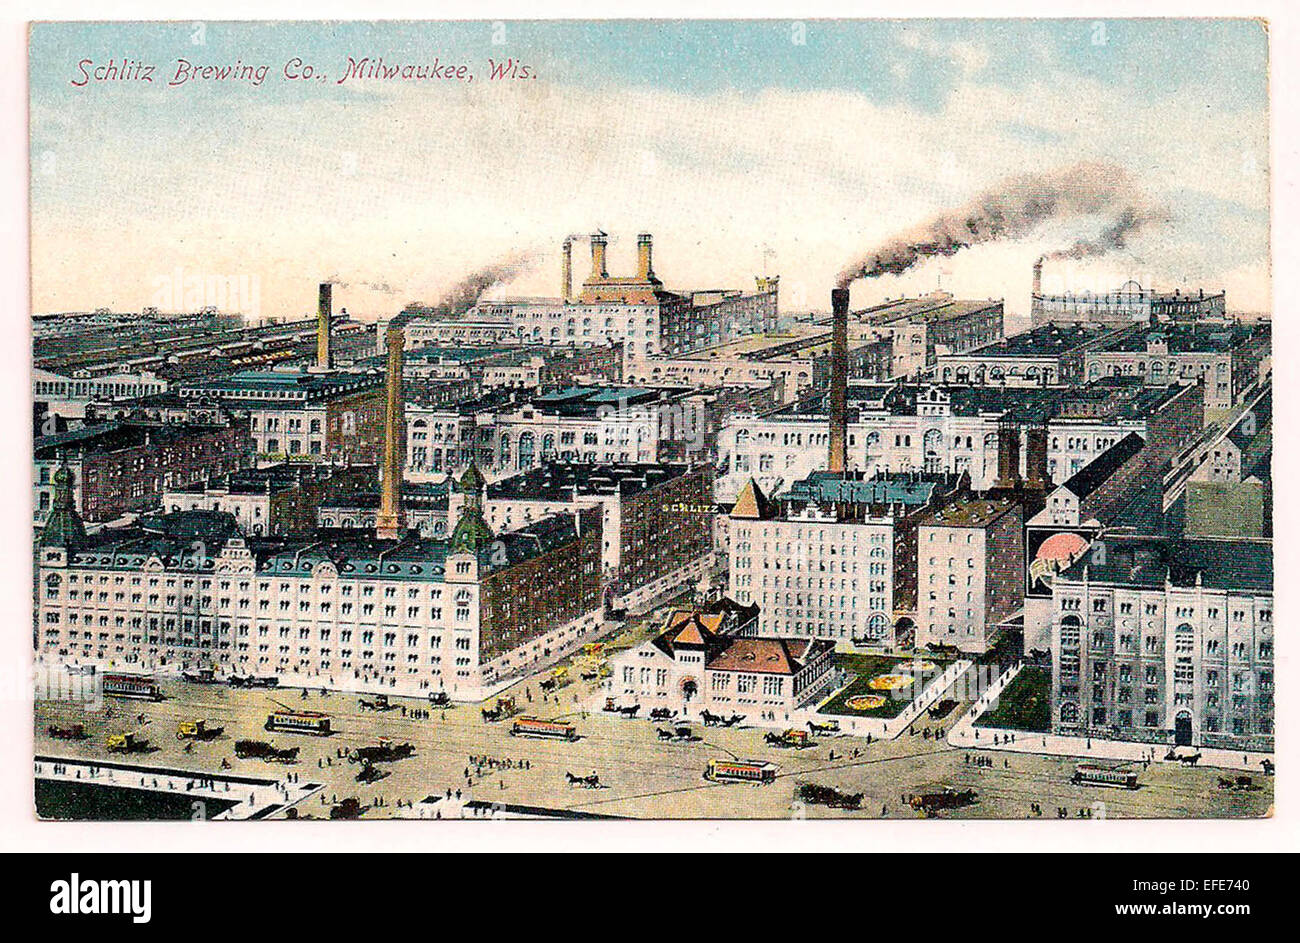 Schlitz Brewing Company, Milwaukee, Wisconsin, vers 1900 Banque D'Images